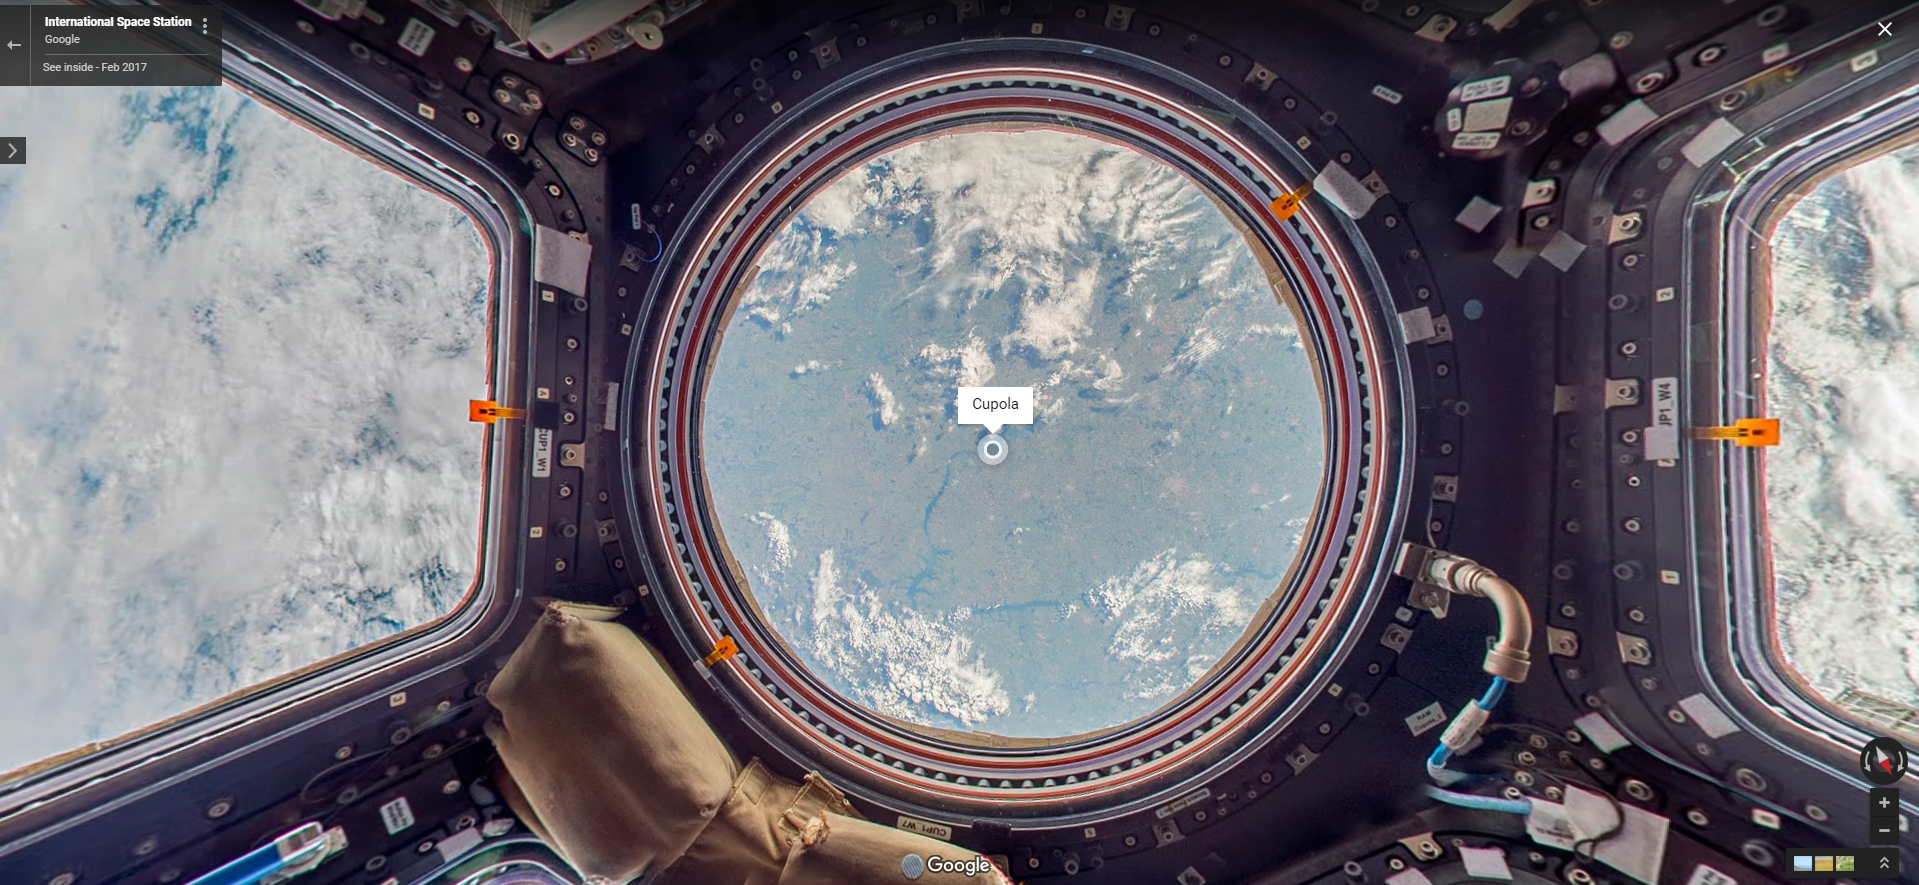 You Can Now Take A Virtual Walk On The International Space Station